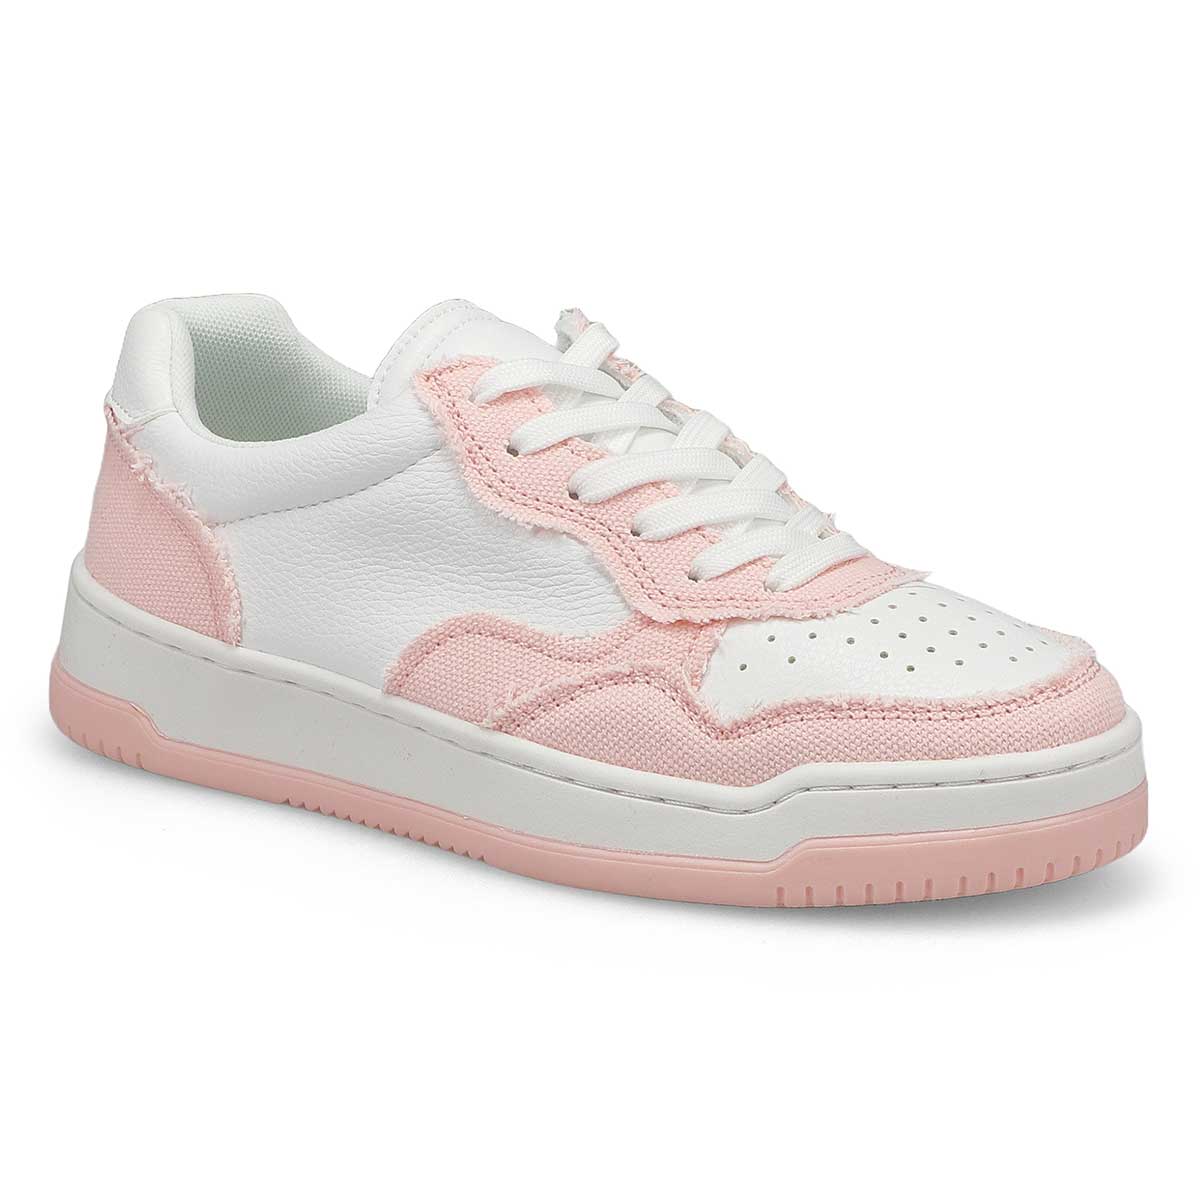 Womens Brynlee Lace Up Sneaker - White/Pink